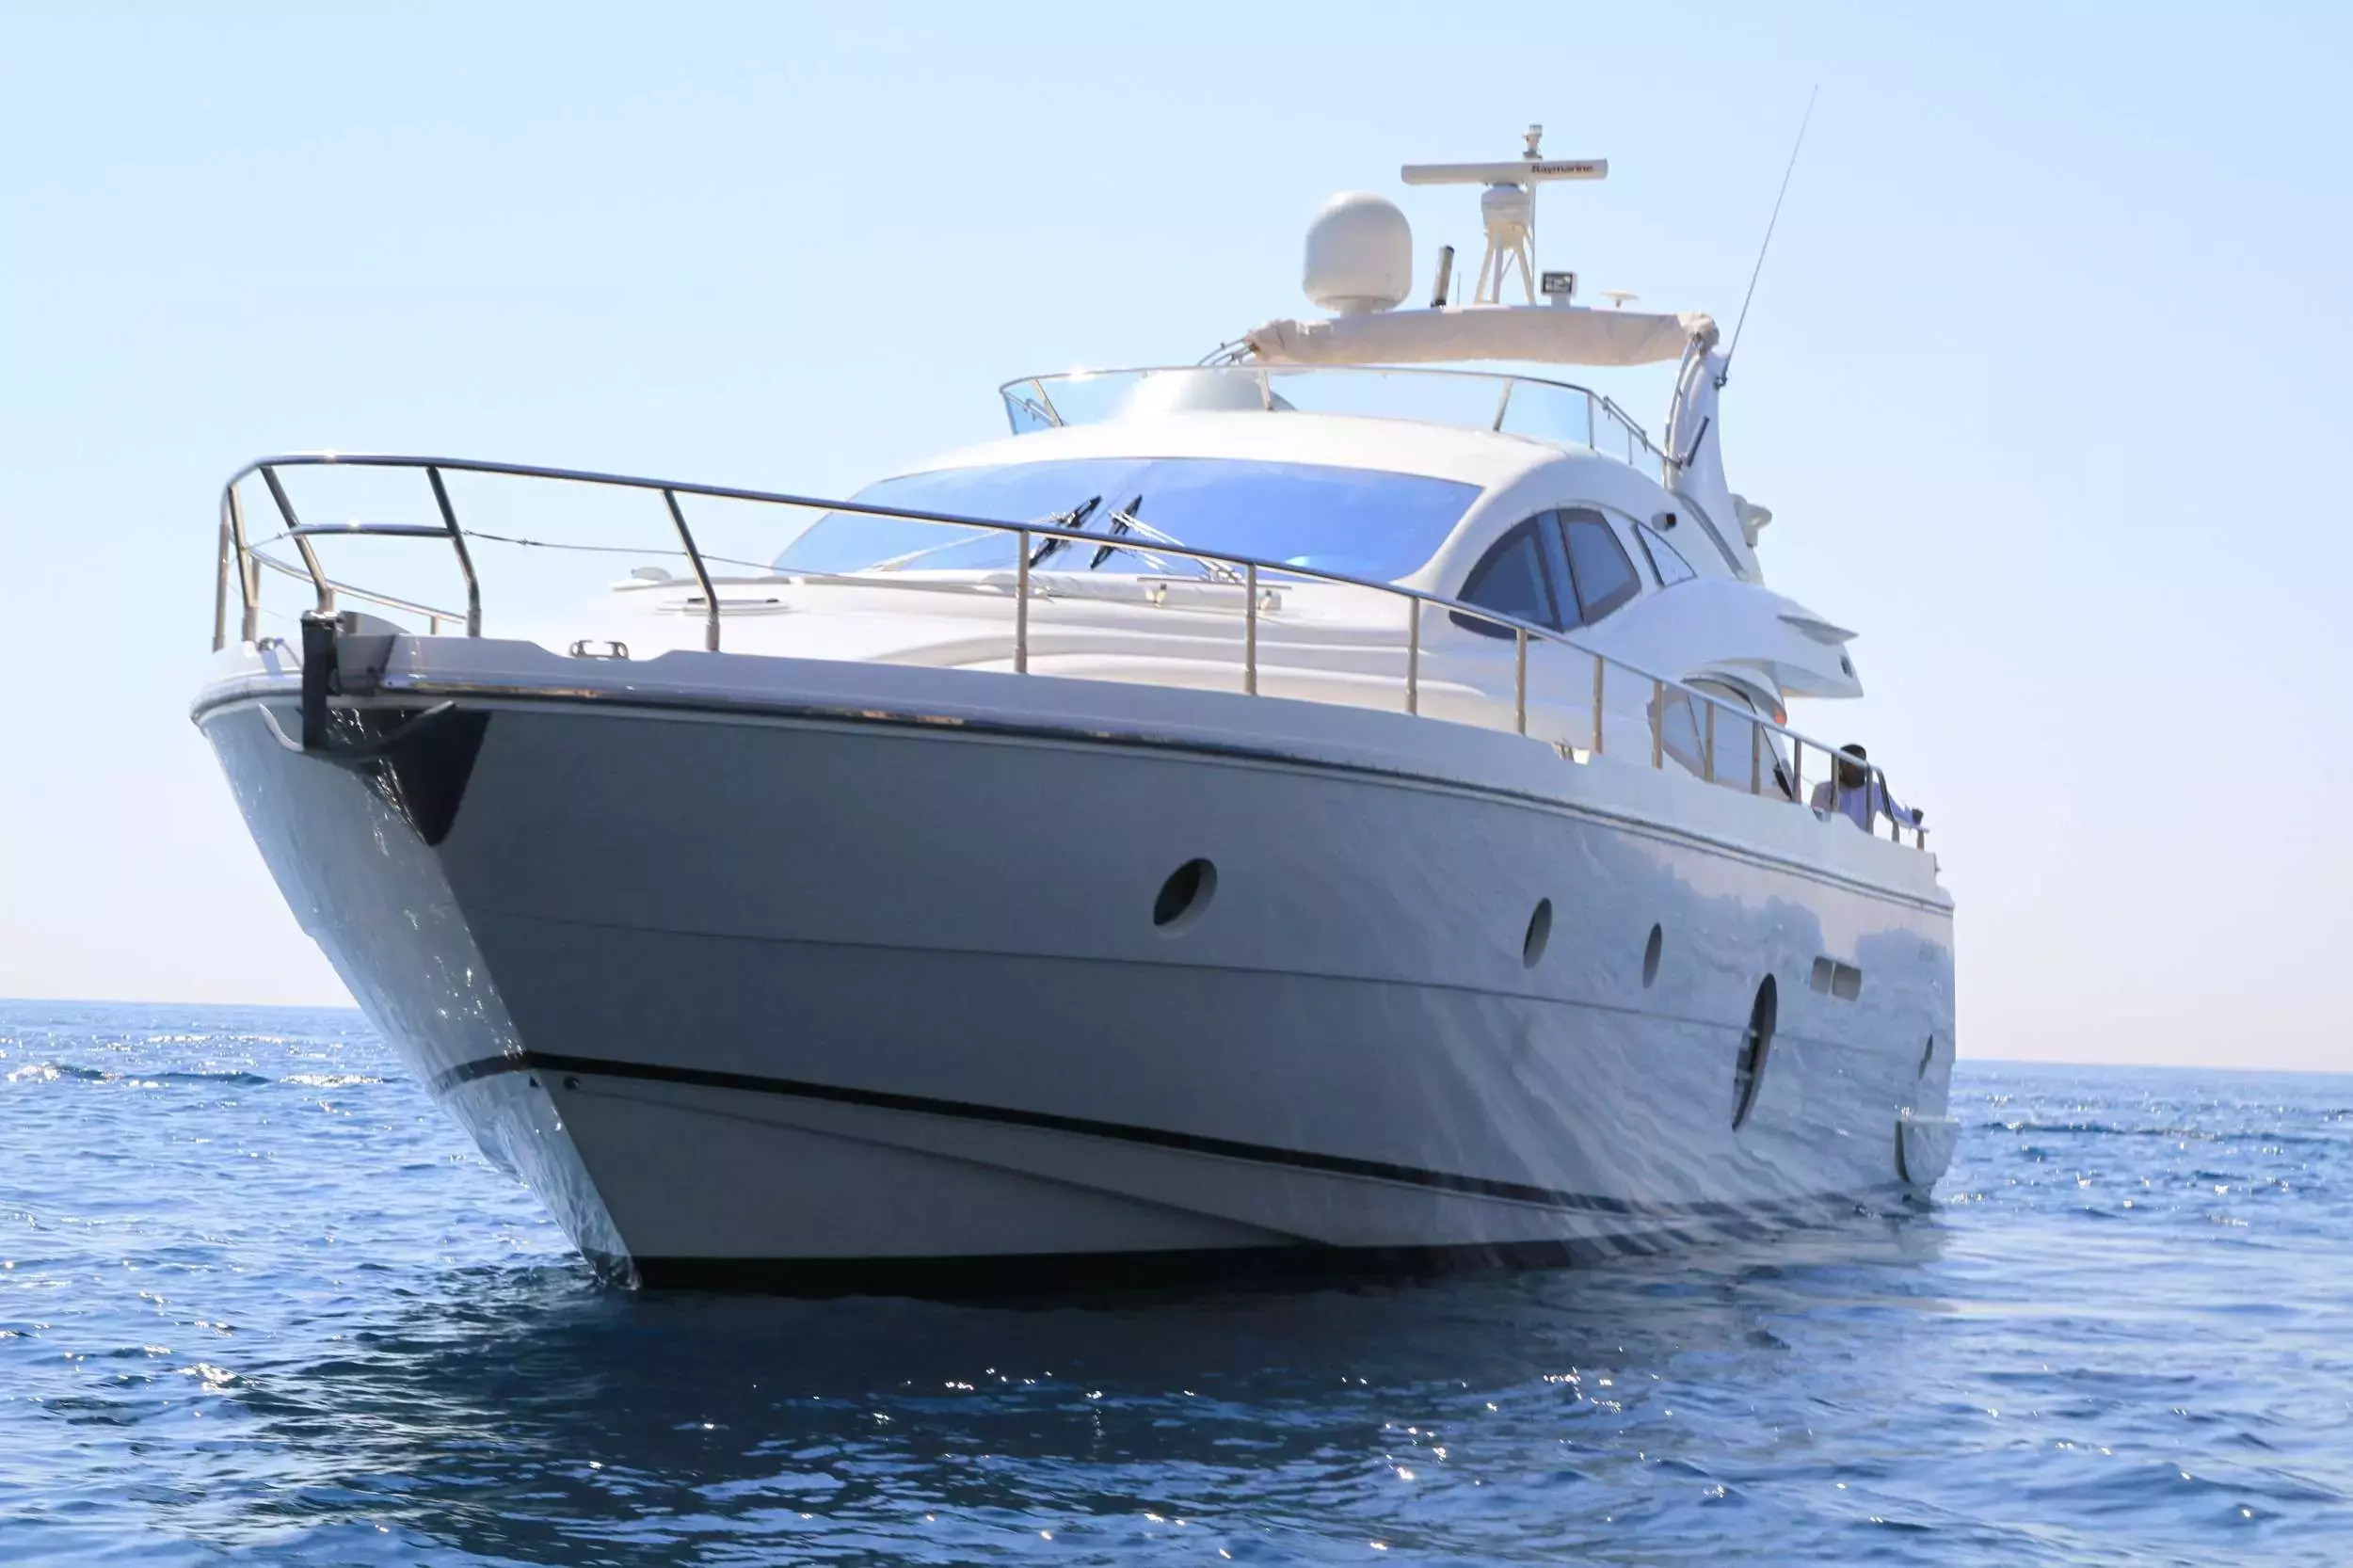 Cinzia by Aicon - Top rates for a Charter of a private Motor Yacht in Italy